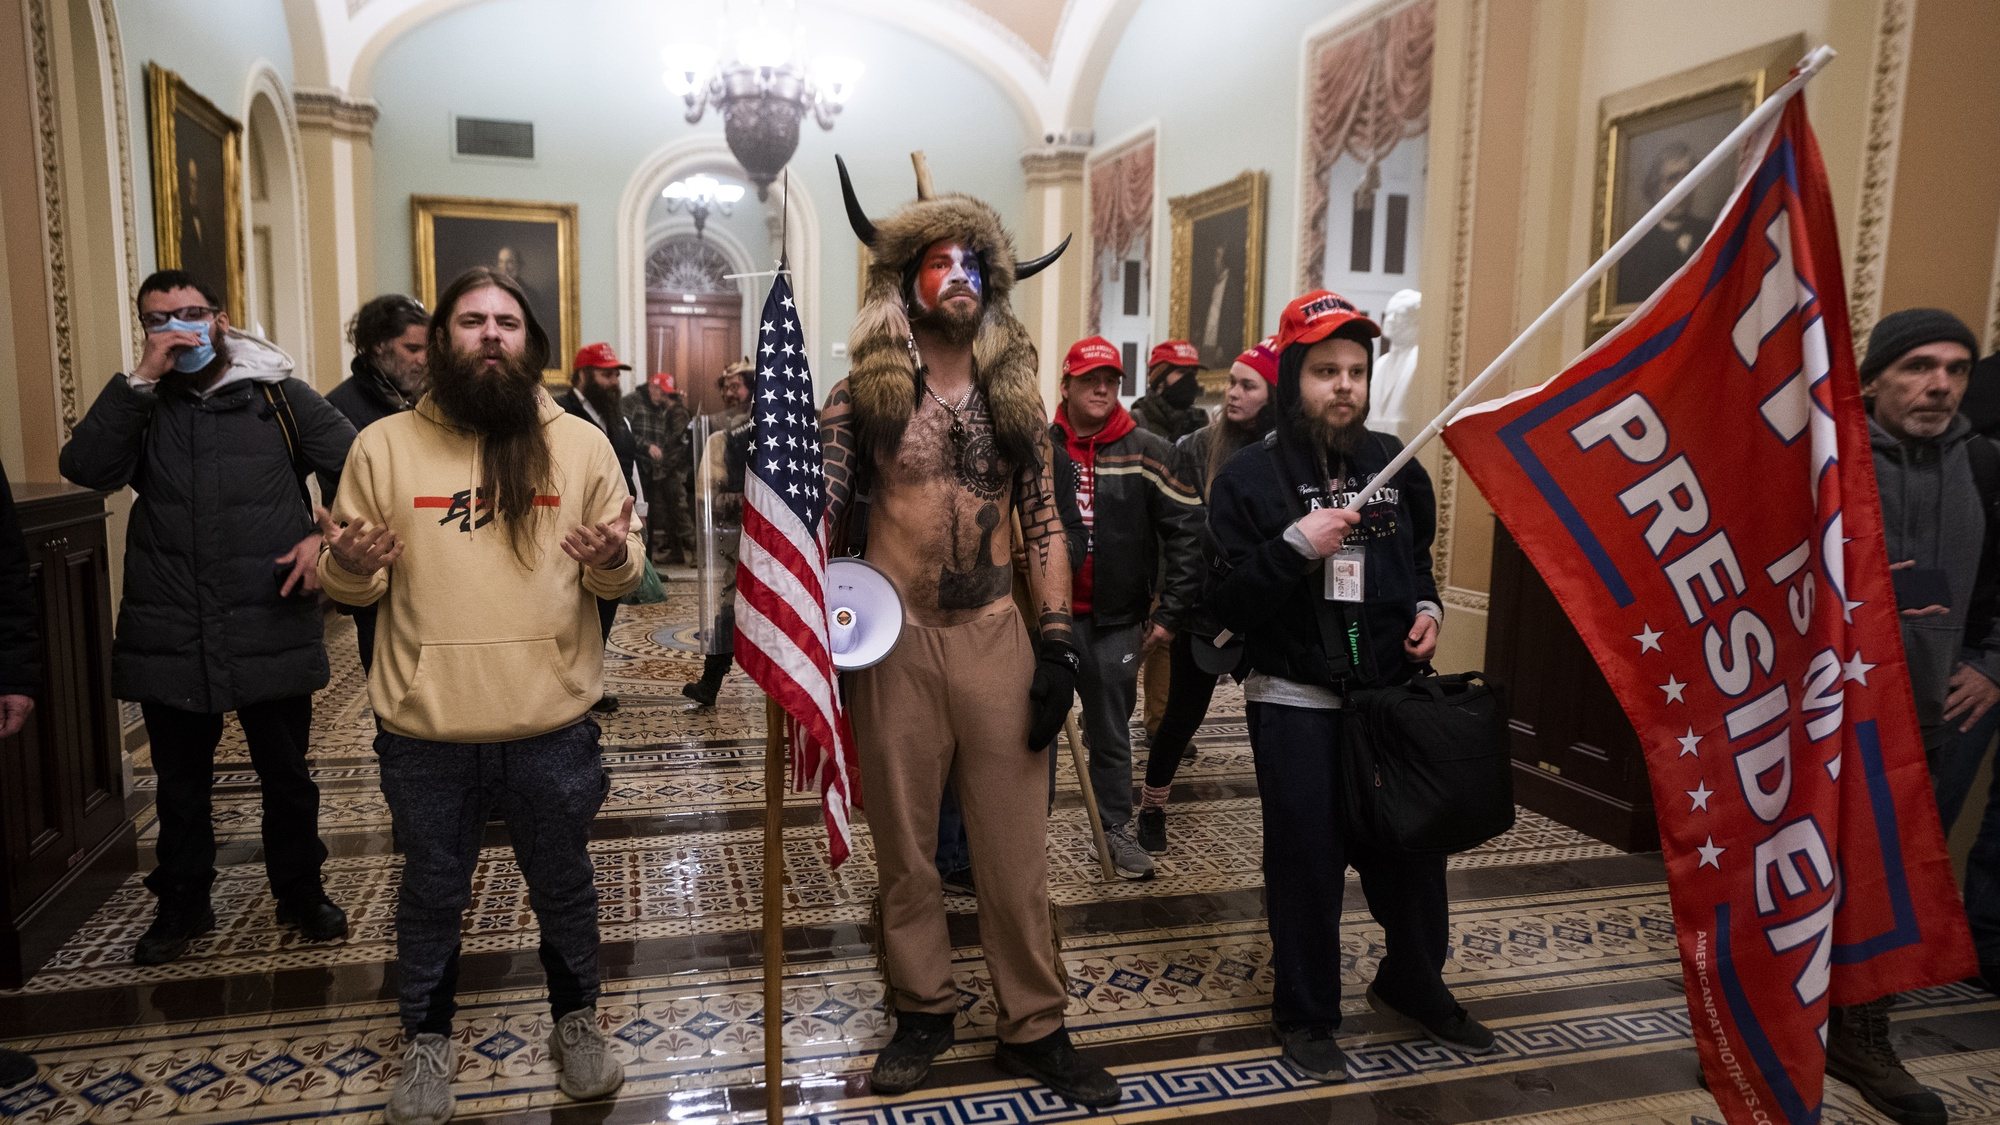 epa09664285 (14/24) (FILE) - Supporters of US President Trump stand by the door to the Senate chambers after they breached the US Capitol security in Washington, DC, USA, 06 January 2021 (reissued 03 January 2021). Following the November 2020 US presidential election, a tone set by supporters of defeated US President Donald Trump escalated further. Trump, who was refusing to concede the victory of Joe Biden, claiming voter fraud and rigged elections, told supporters and white nationalist extreme-right group Proud Boys to respectively &#039;Stop the Steal&#039; and to &#039;stand back and stand by&#039;. His social media accounts were suspended and the alt-right platform Parler gained in user numbers. On 06 January 2021, incumbent US vice president Pence was due to certify the Electoral College votes before Congress, the last step in the process before President-elect Biden was to be sworn in. In the morning, pro-Trump protesters had gathered for the so-called Save America March. Soon after Trump finished his speech at the Ellipse, the crowd marched to the Capitol. The attack had begun. Rioters broke into the Capitol building where the joint Congress session was being held. Lawmakers barricaded themselves inside the chambers and donned tear gas masks while rioters vandalized the building, some even occupying offices such as House Speaker Pelosi&#039;s. Eventually in the evening the building was cleared from insurrectionists, and the Congress chambers reconvened their session, confirming Joe Biden as the winner of the 2020 US presidential election. In the aftermath, more than 600 people were charged with federal crimes in connection to the insurgency, and close Trump aides such as Steve Bannon, Mark Meadows and Roger Stone were subpoenaed by the House select committee investigating the attack. Trump himself was acquitted by the Senate in his second impeachment trial, this time for &quot;inciting an insurrection&quot;. EPA/JIM LO SCALZO ATTENTION: This Image is part of a PHOTO SET *** Loc